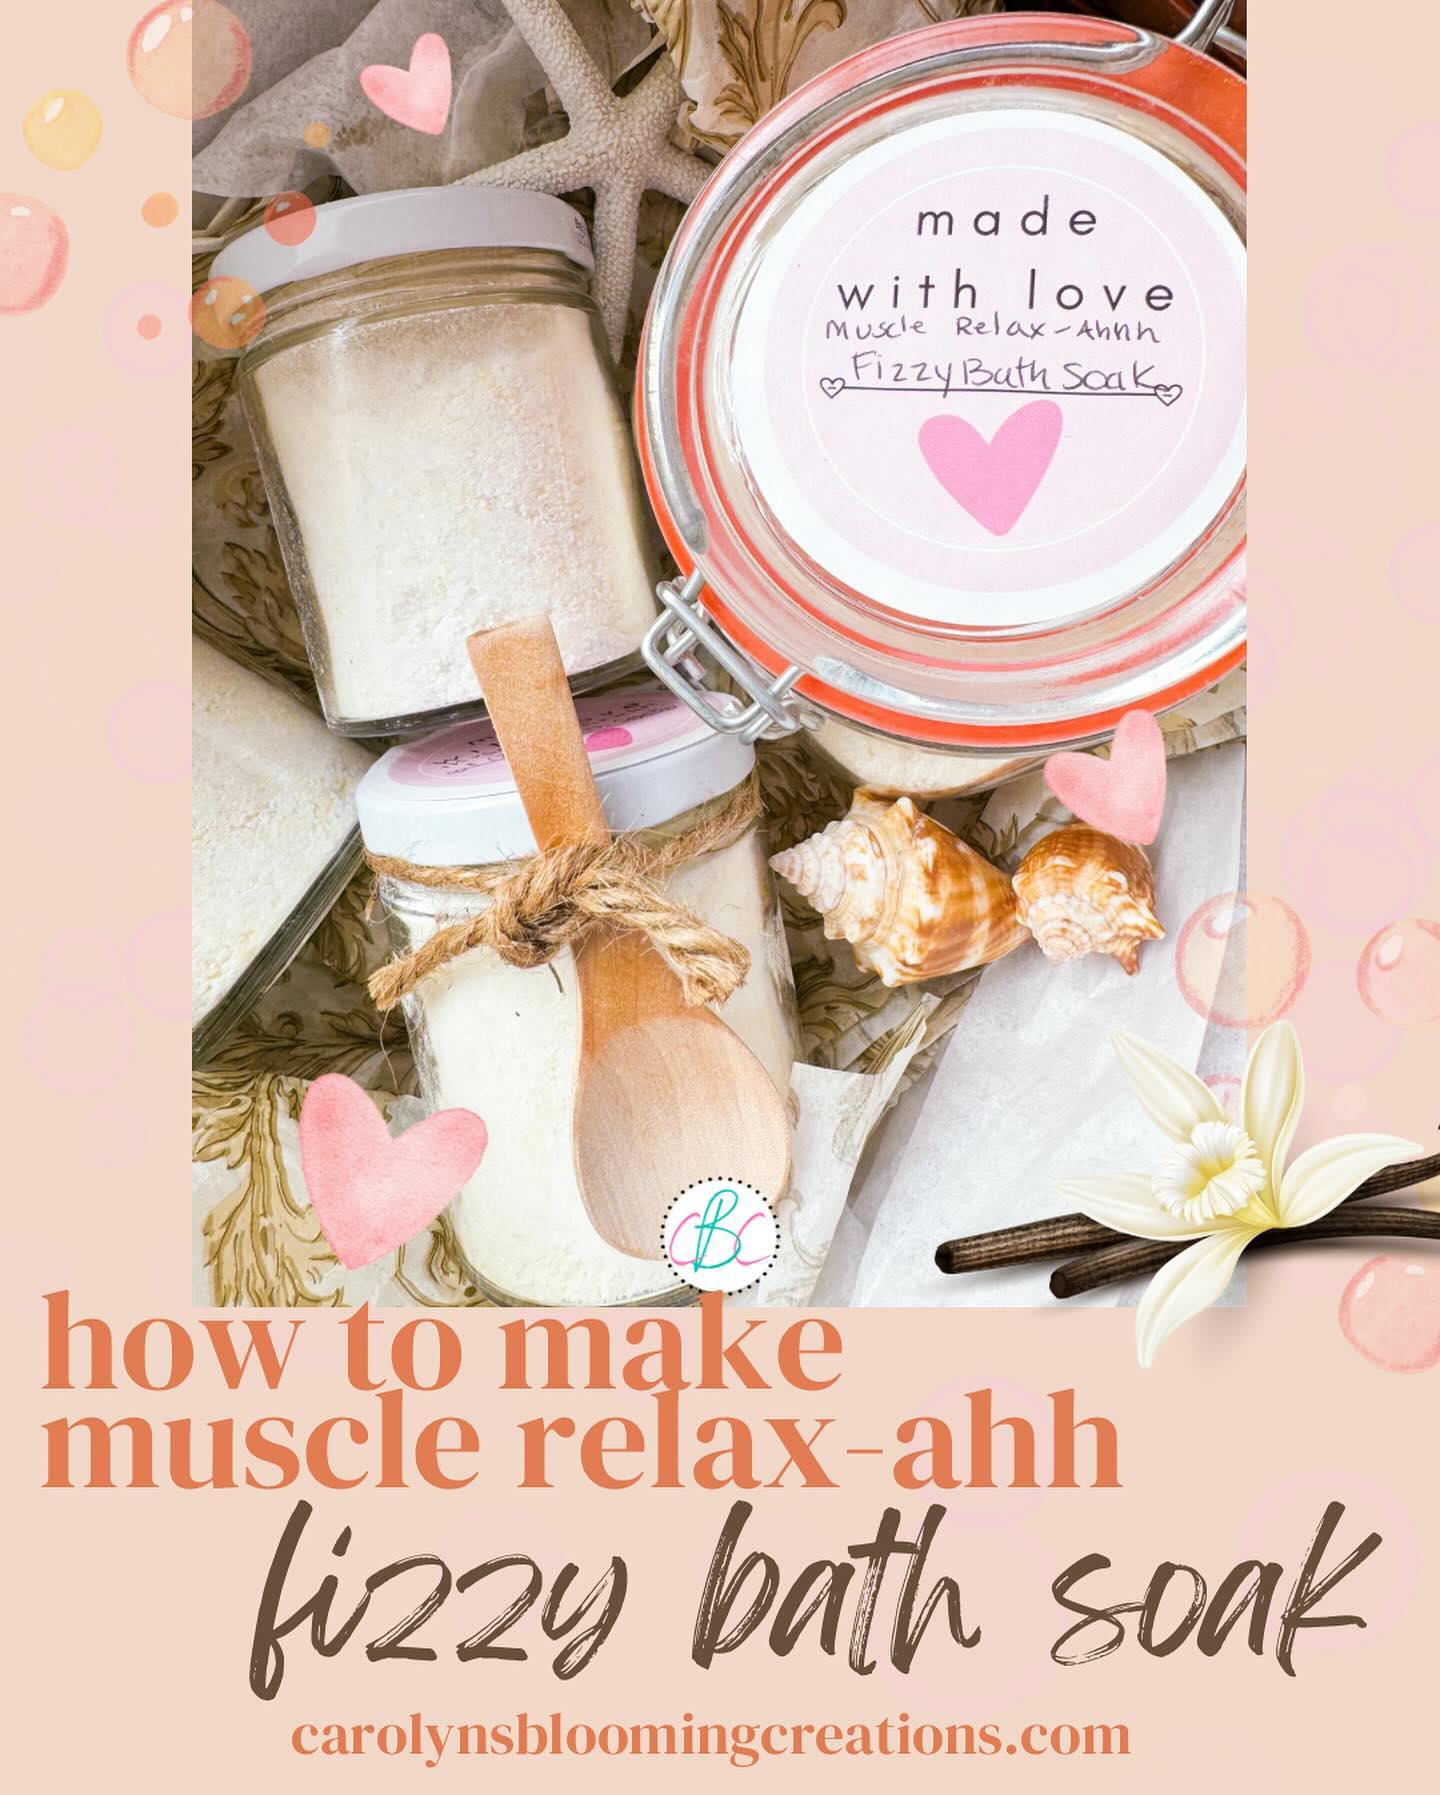 Sometimes you gotta fail 💖

This fizzy bath soak recipe was supposed to be a bath bomb recipe. It failed HARD. Well, I a